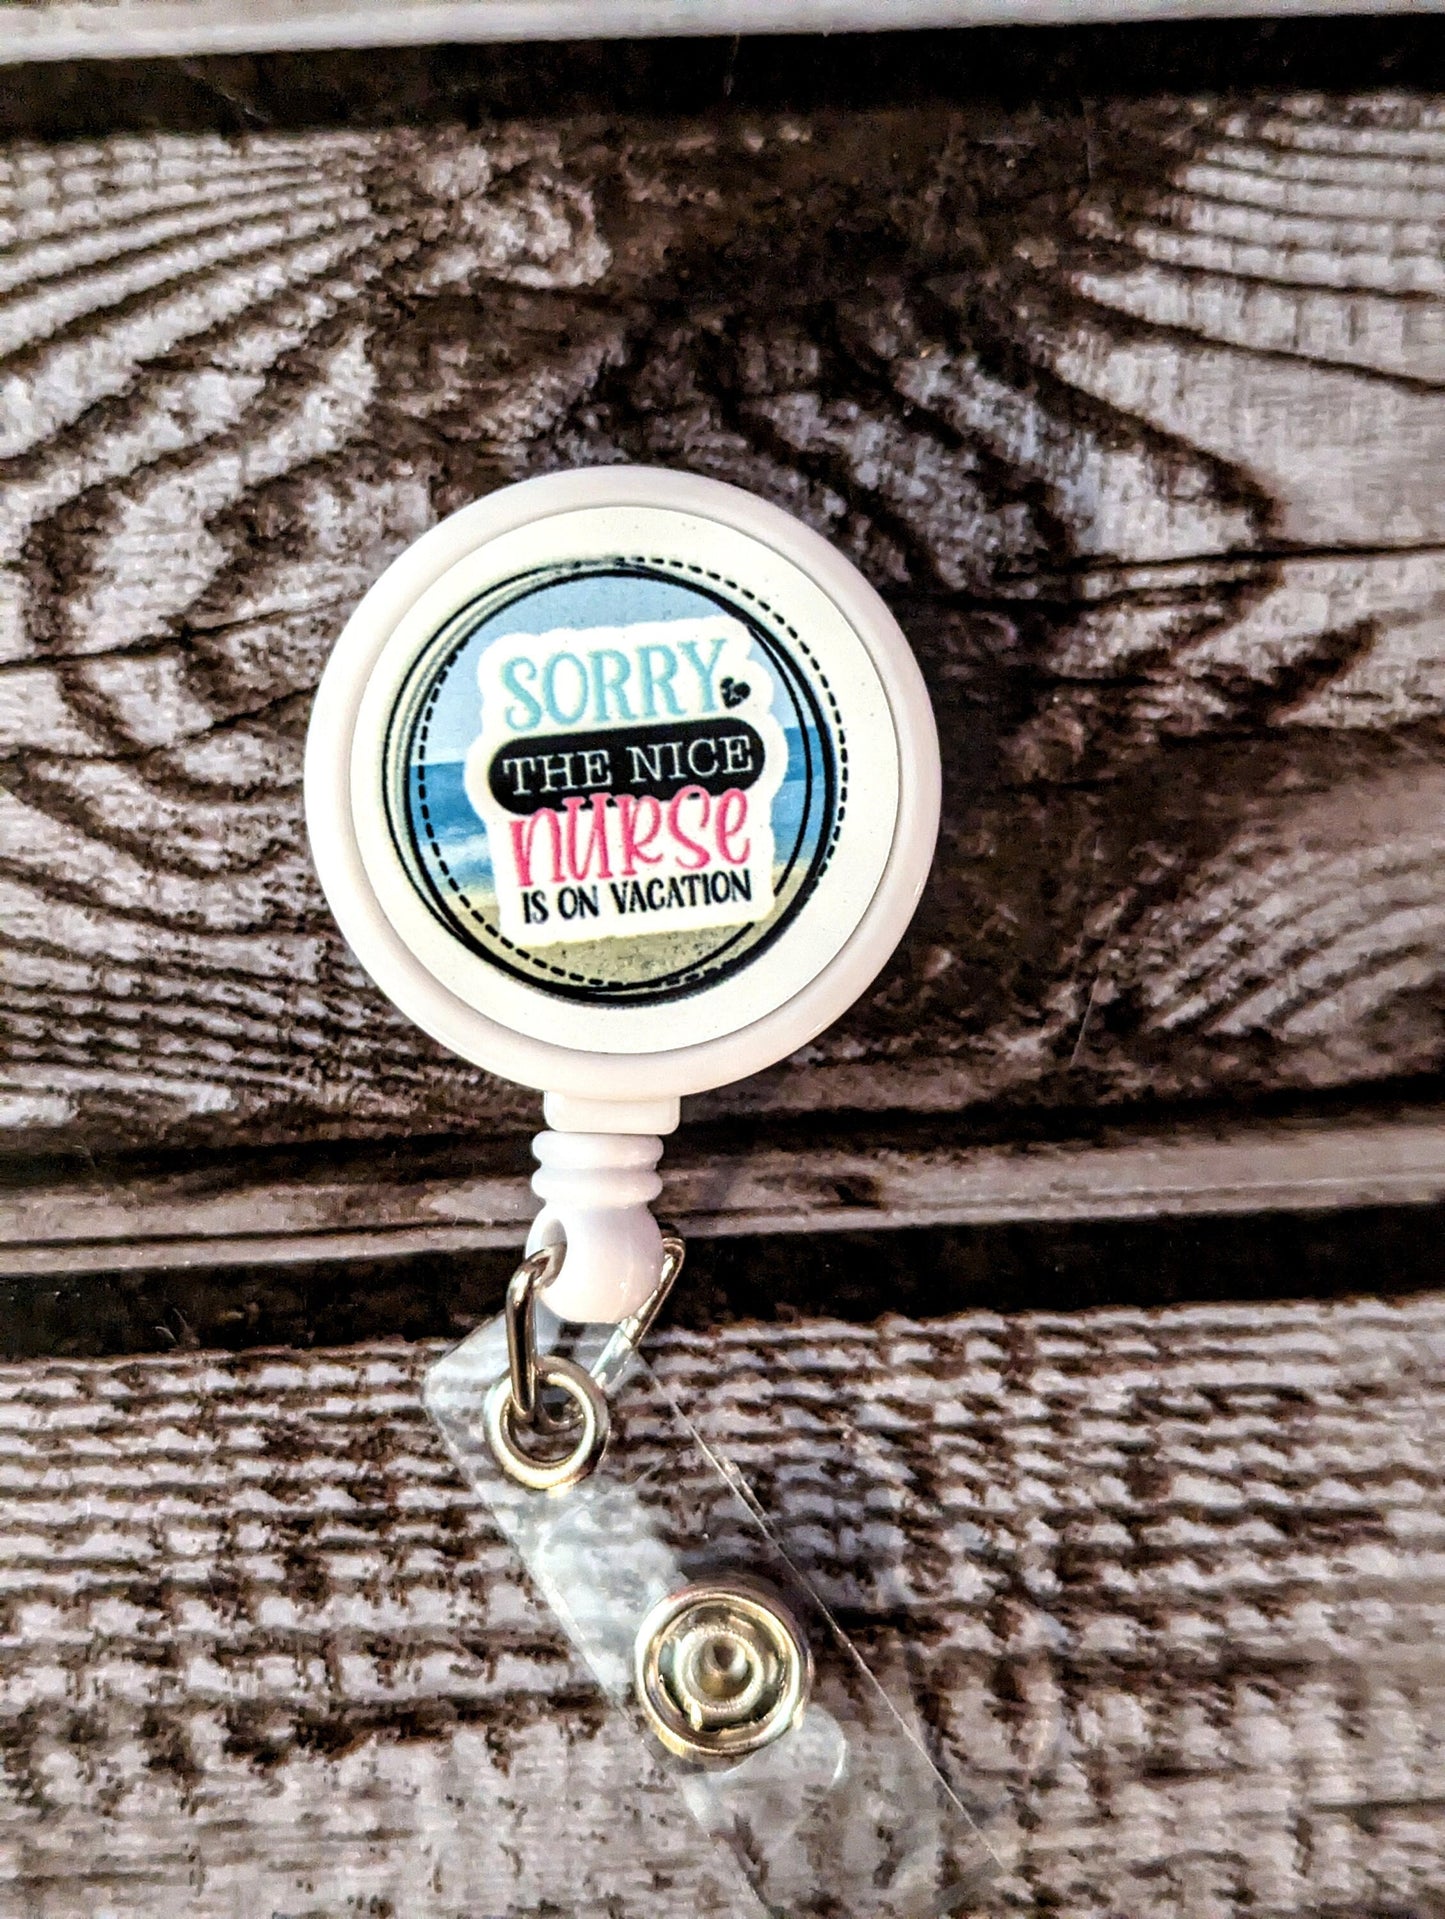 Sorry the nice nurse in on vacation badge reel